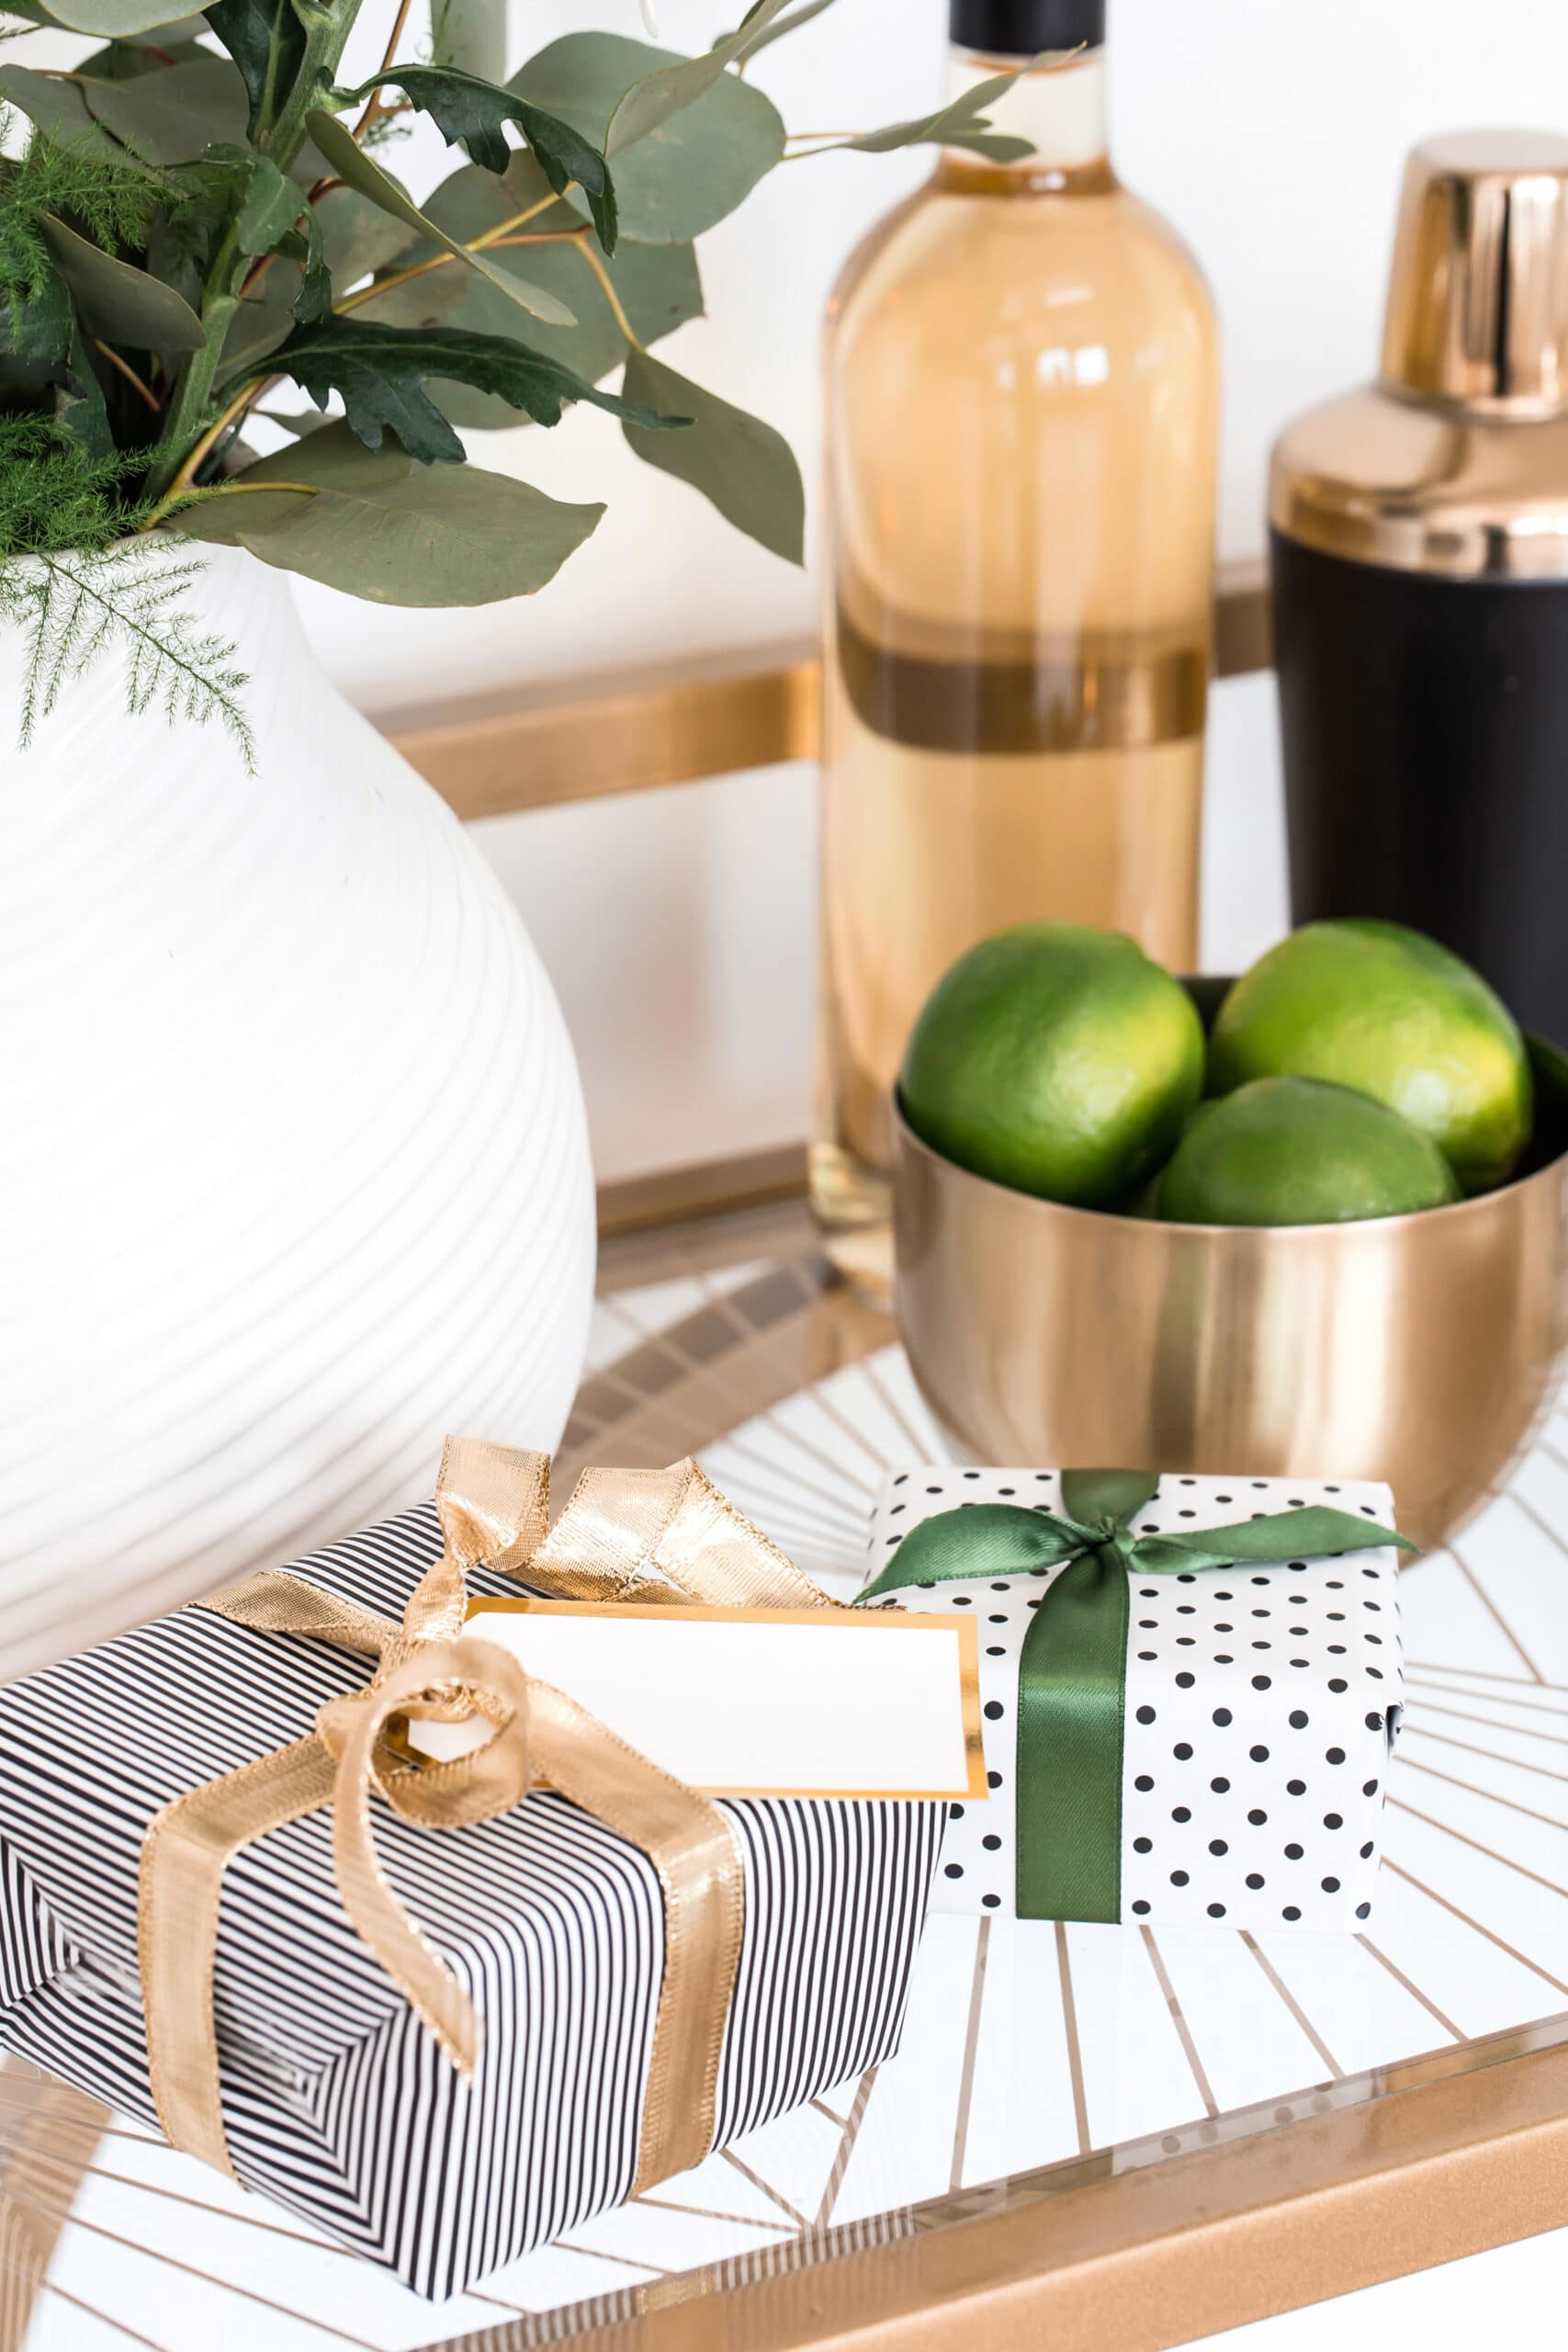 How To Be Guest-Ready With These Last-Minute Holiday Declutter